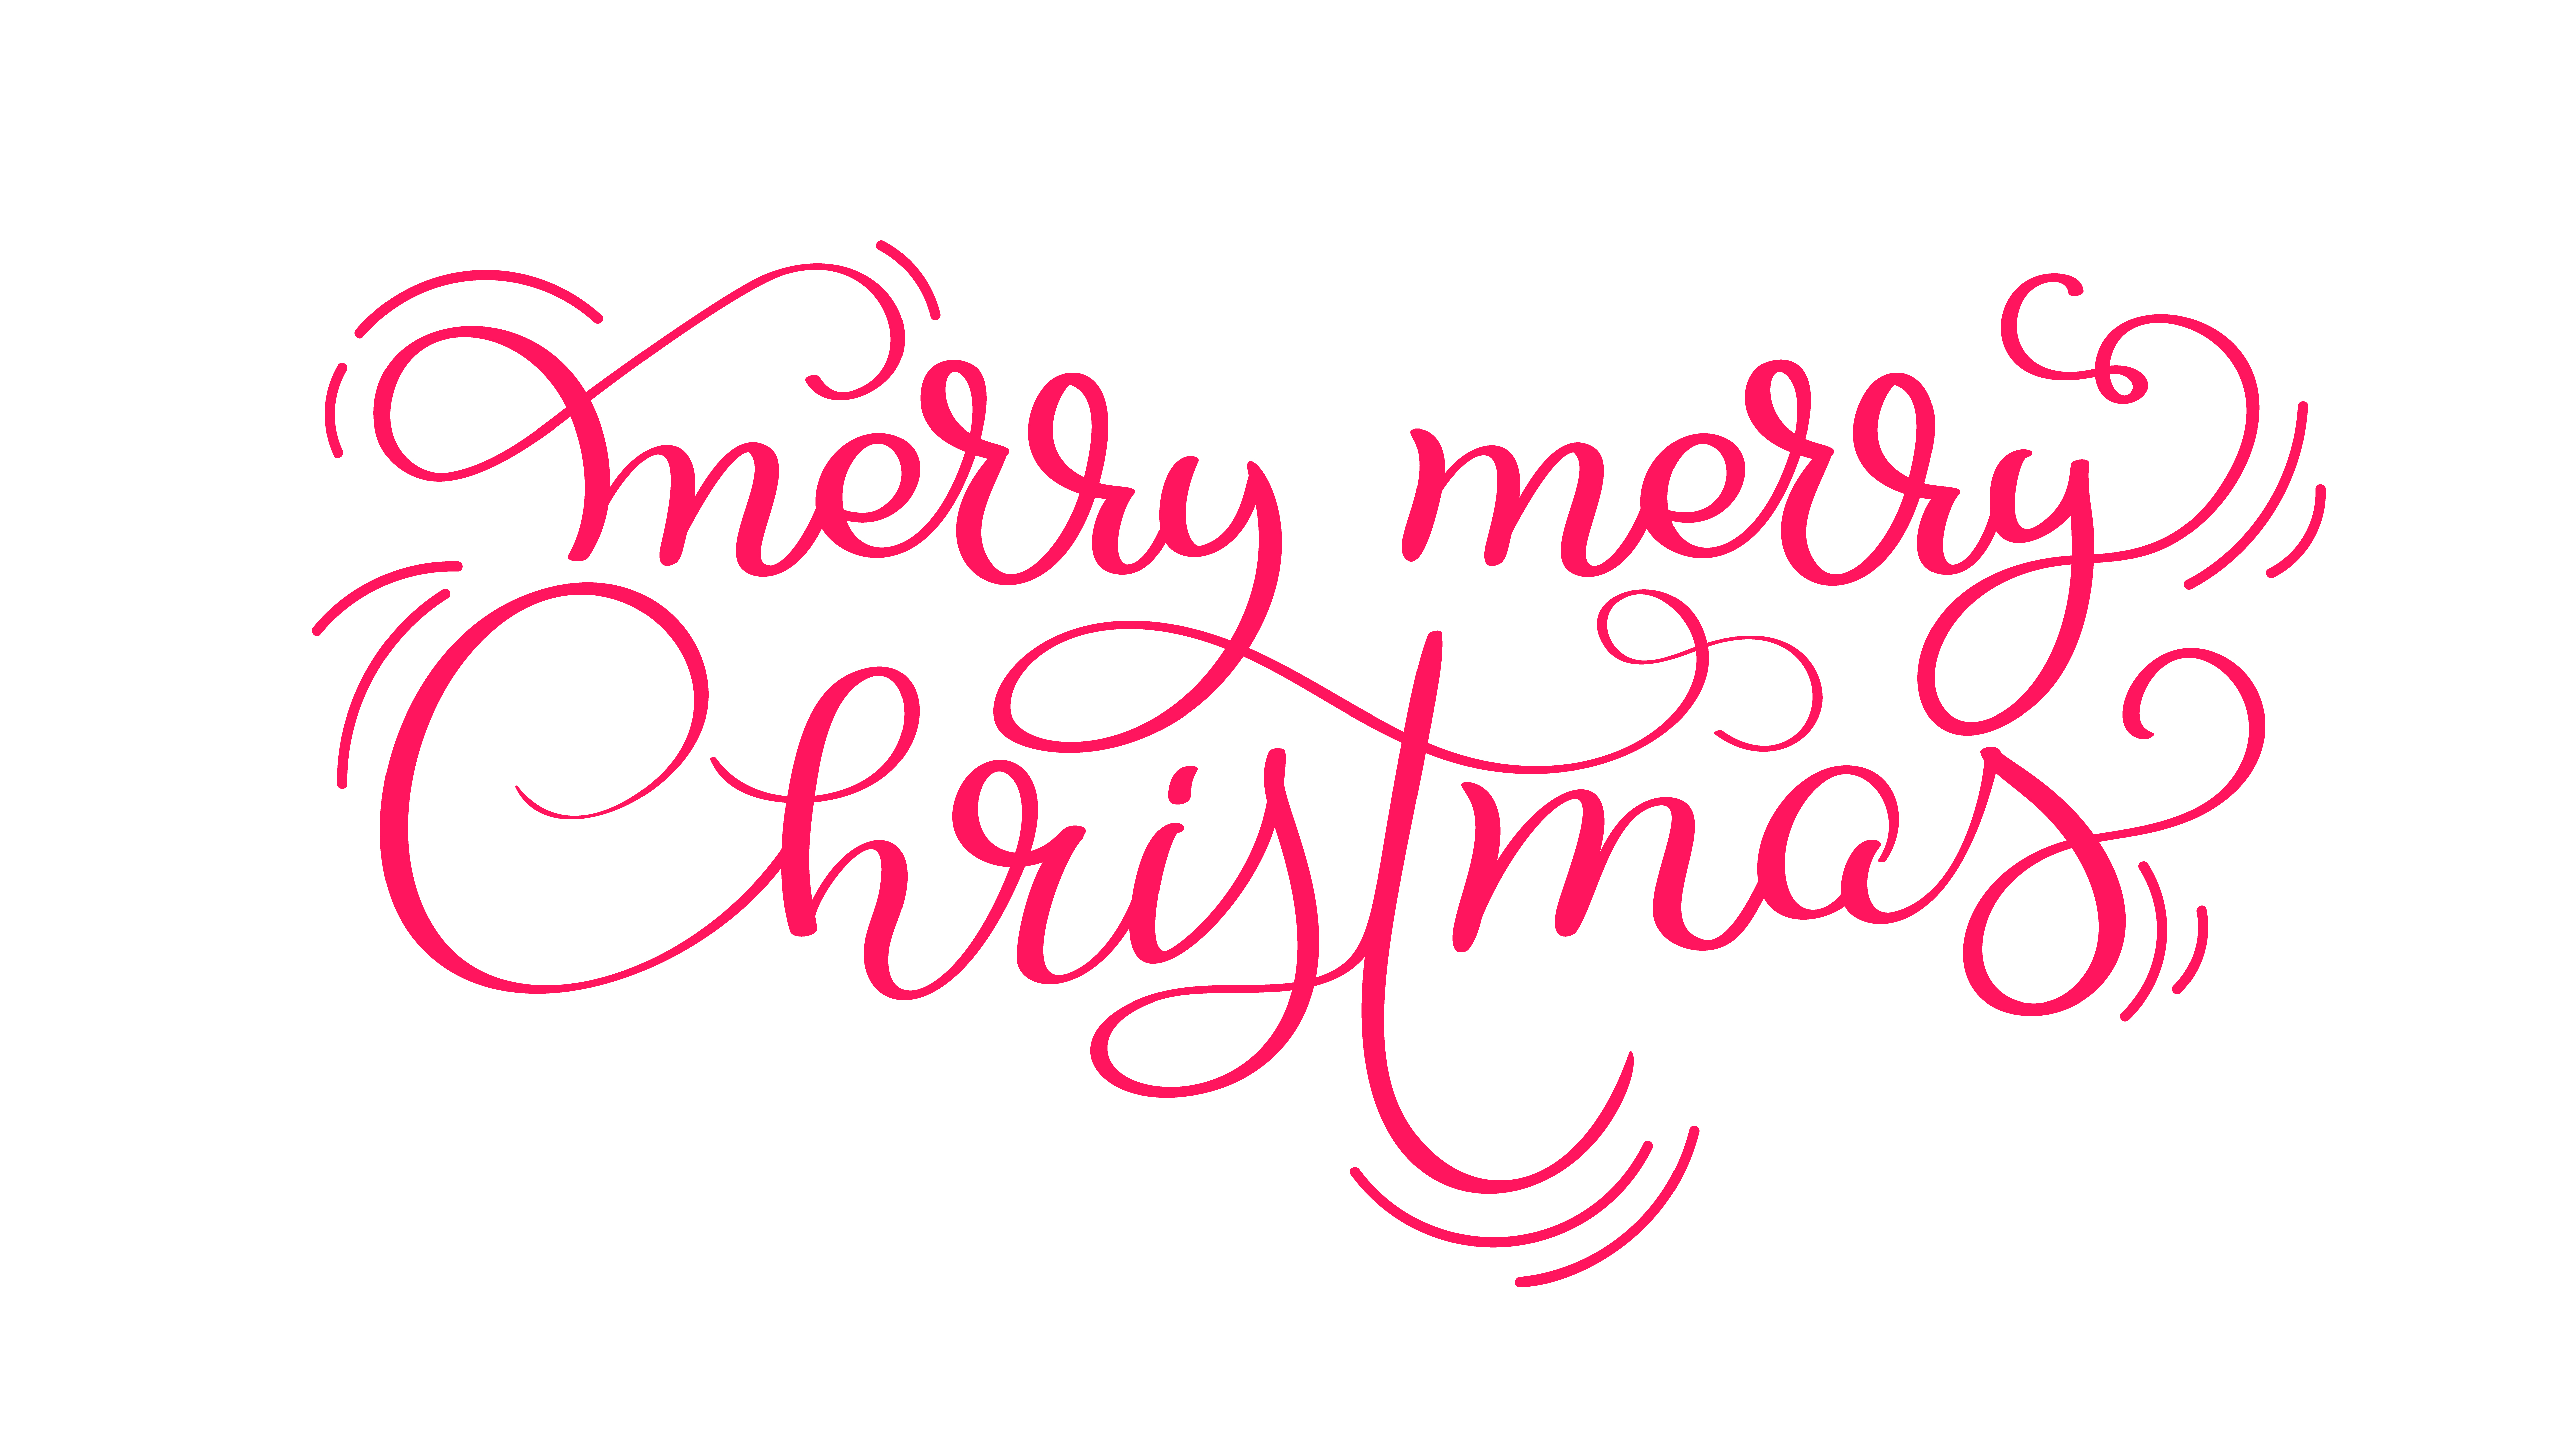 Red Merry merry Christmas vintage calligraphy lettering vector text ...